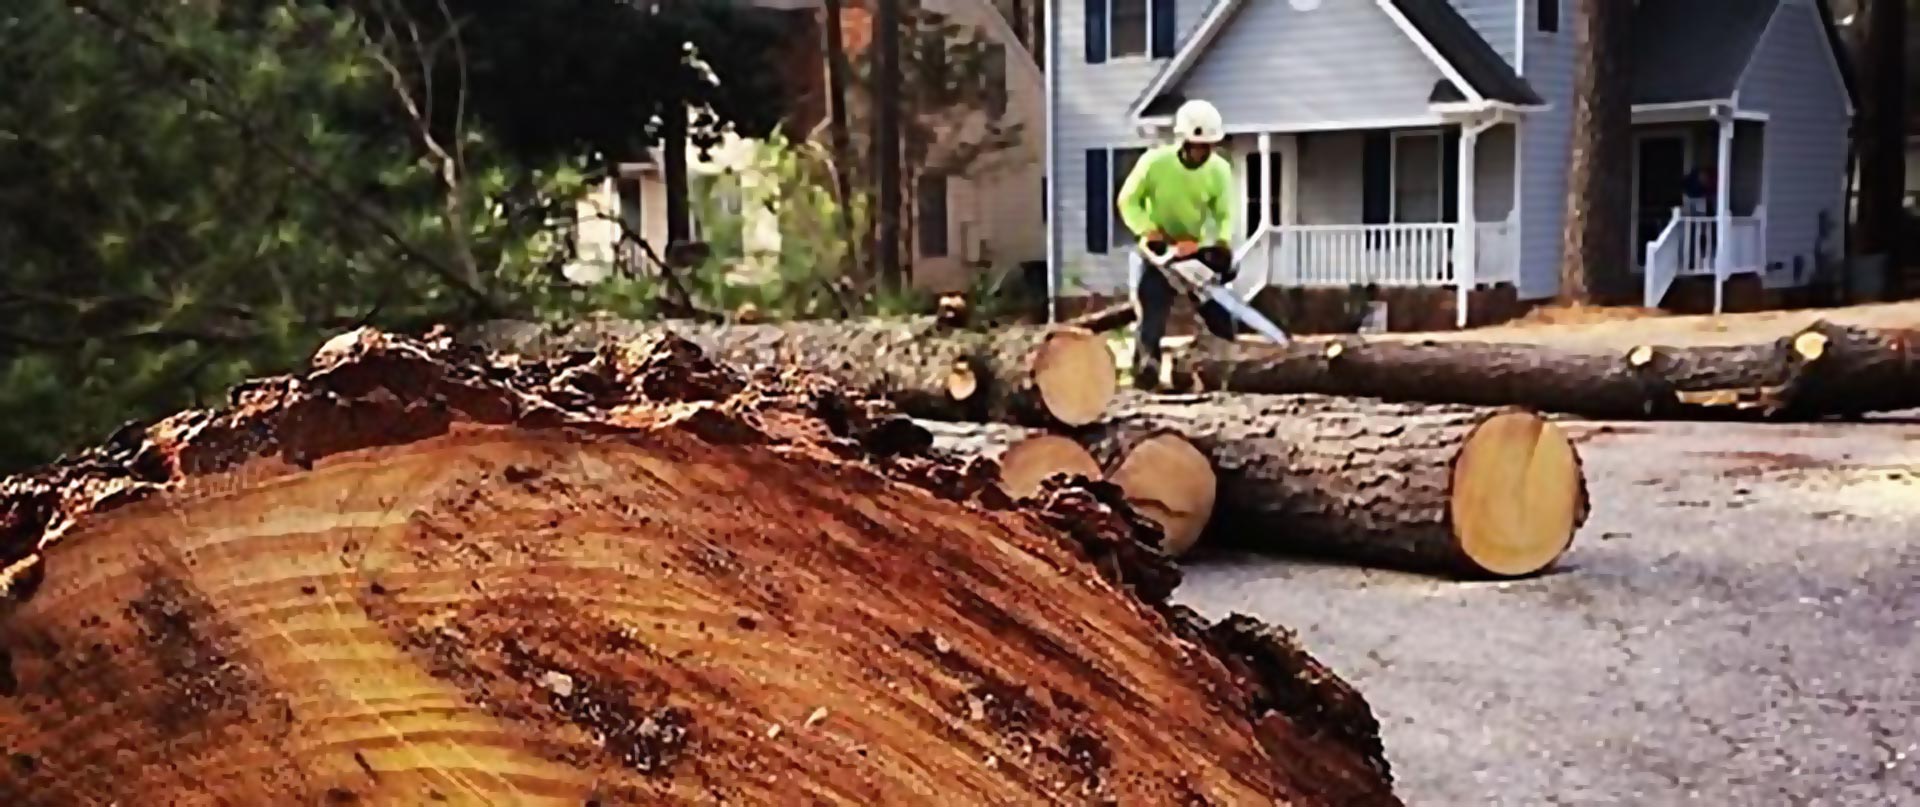 Timber Removal Services: Handling Logs